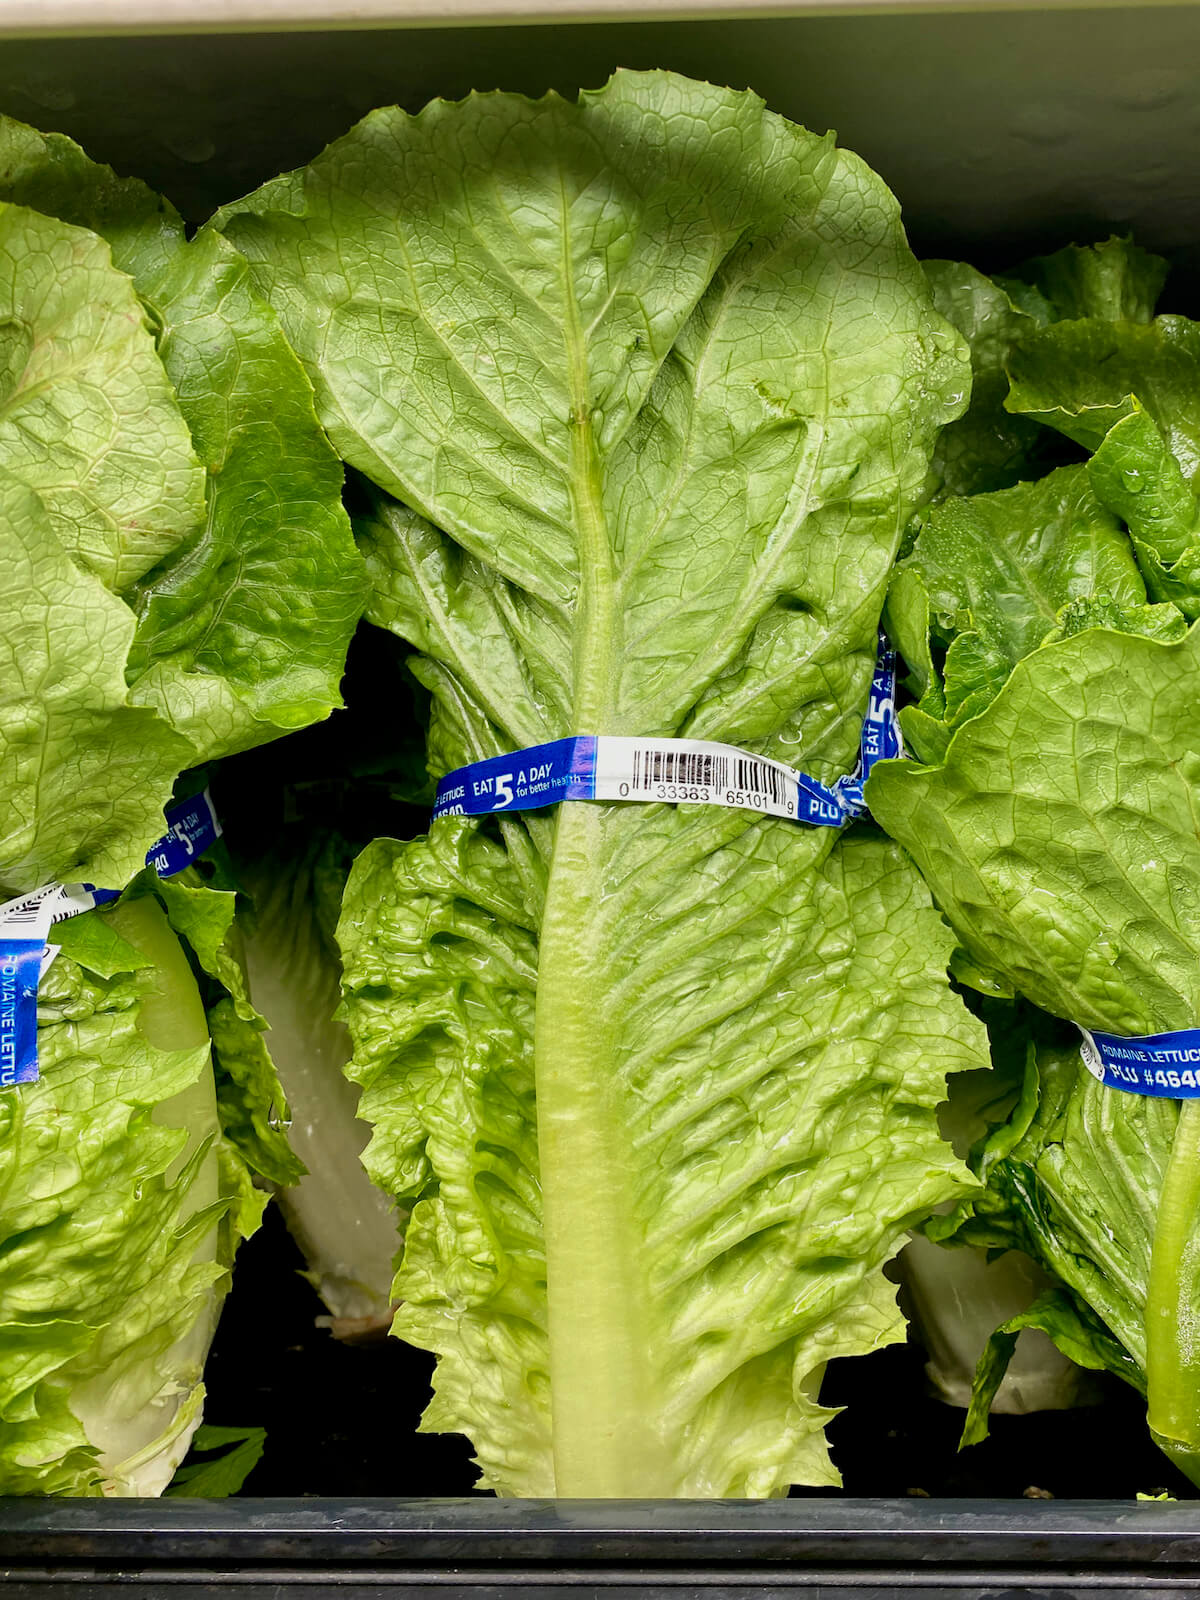 Heads of romaine lettuce at the grocery store.